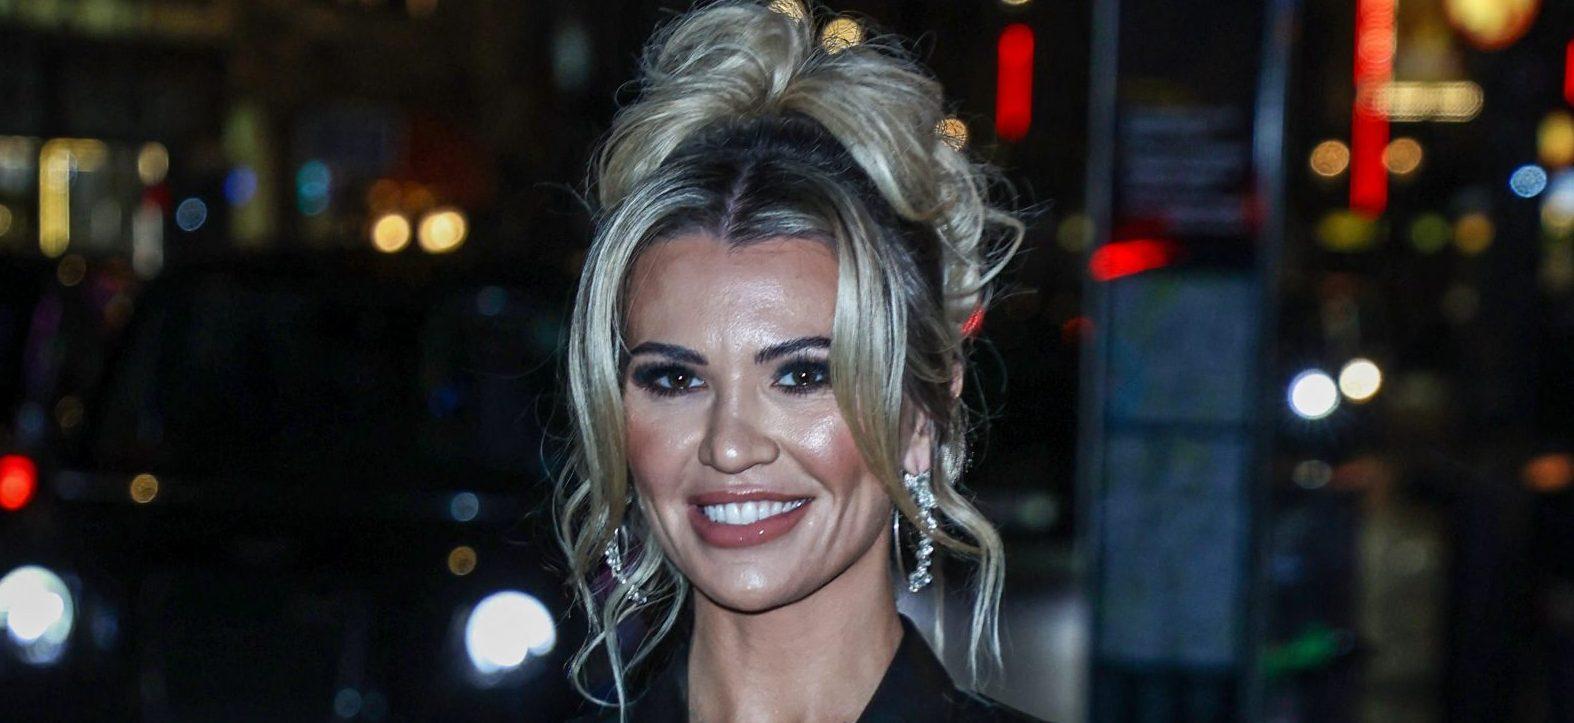 Model Christine McGuinness’ Ex Paddy Throws Shade As He Misses Out On Vacation